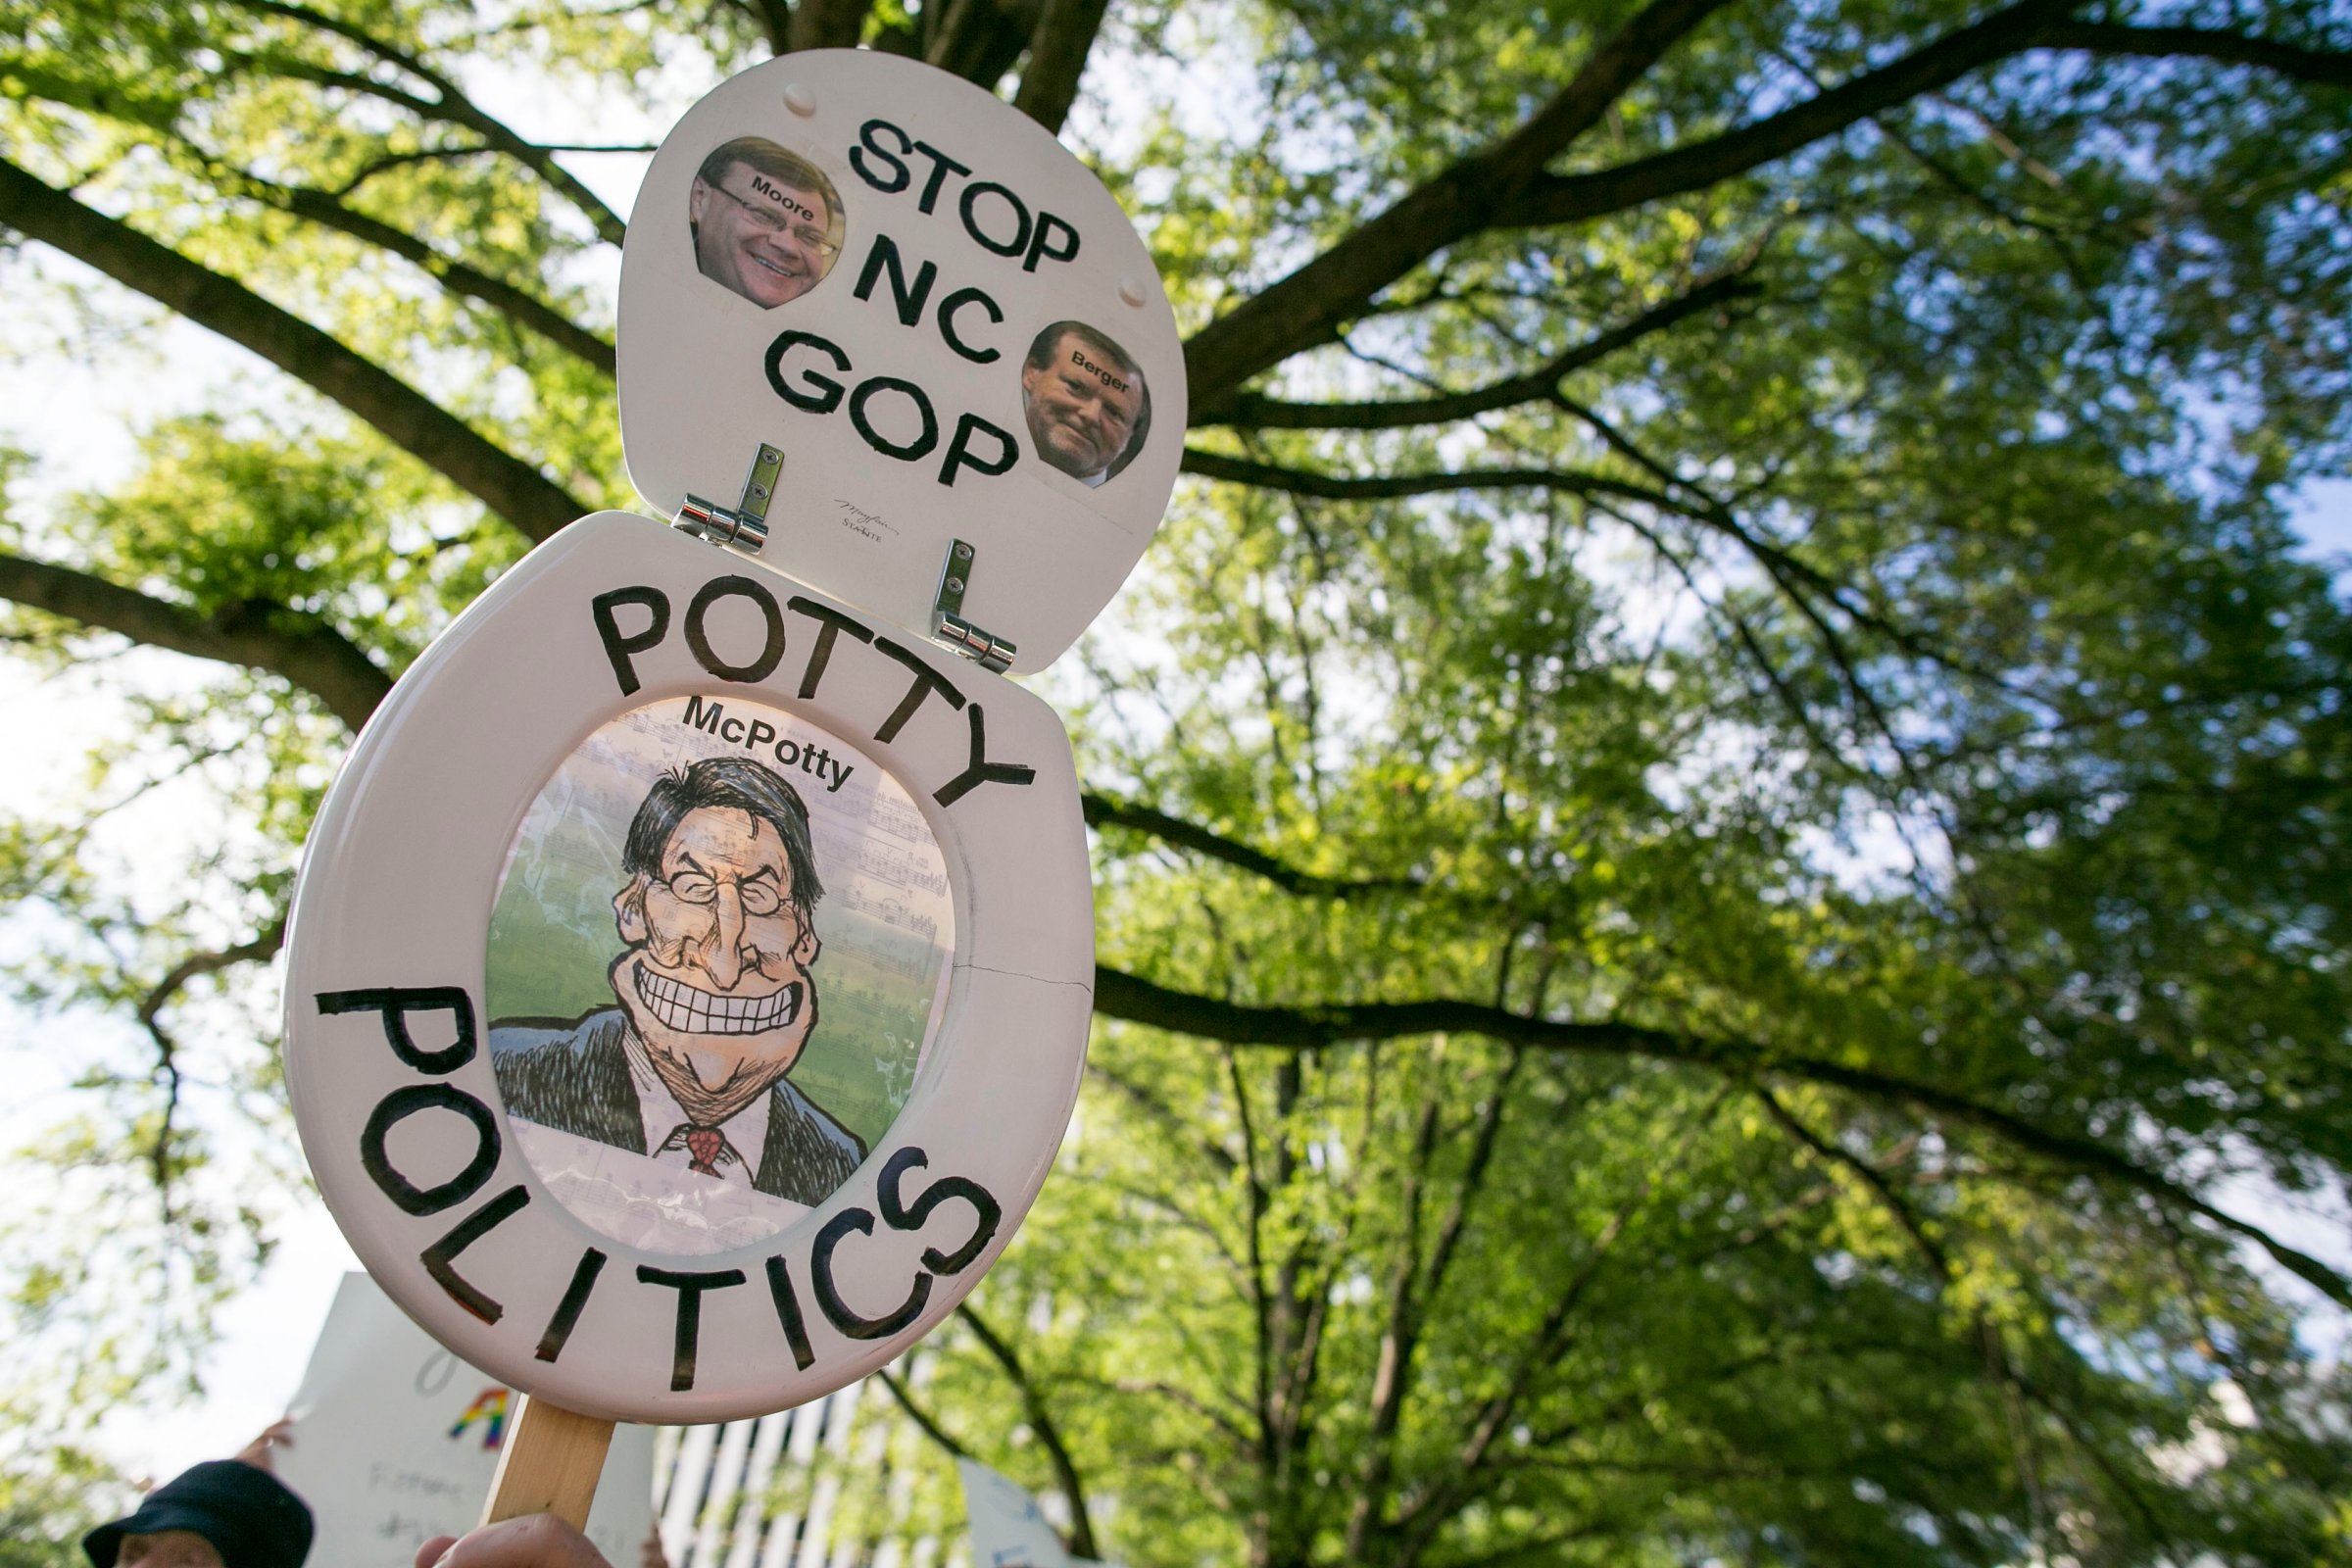 Protests Over LGBT Rights in North Carolina